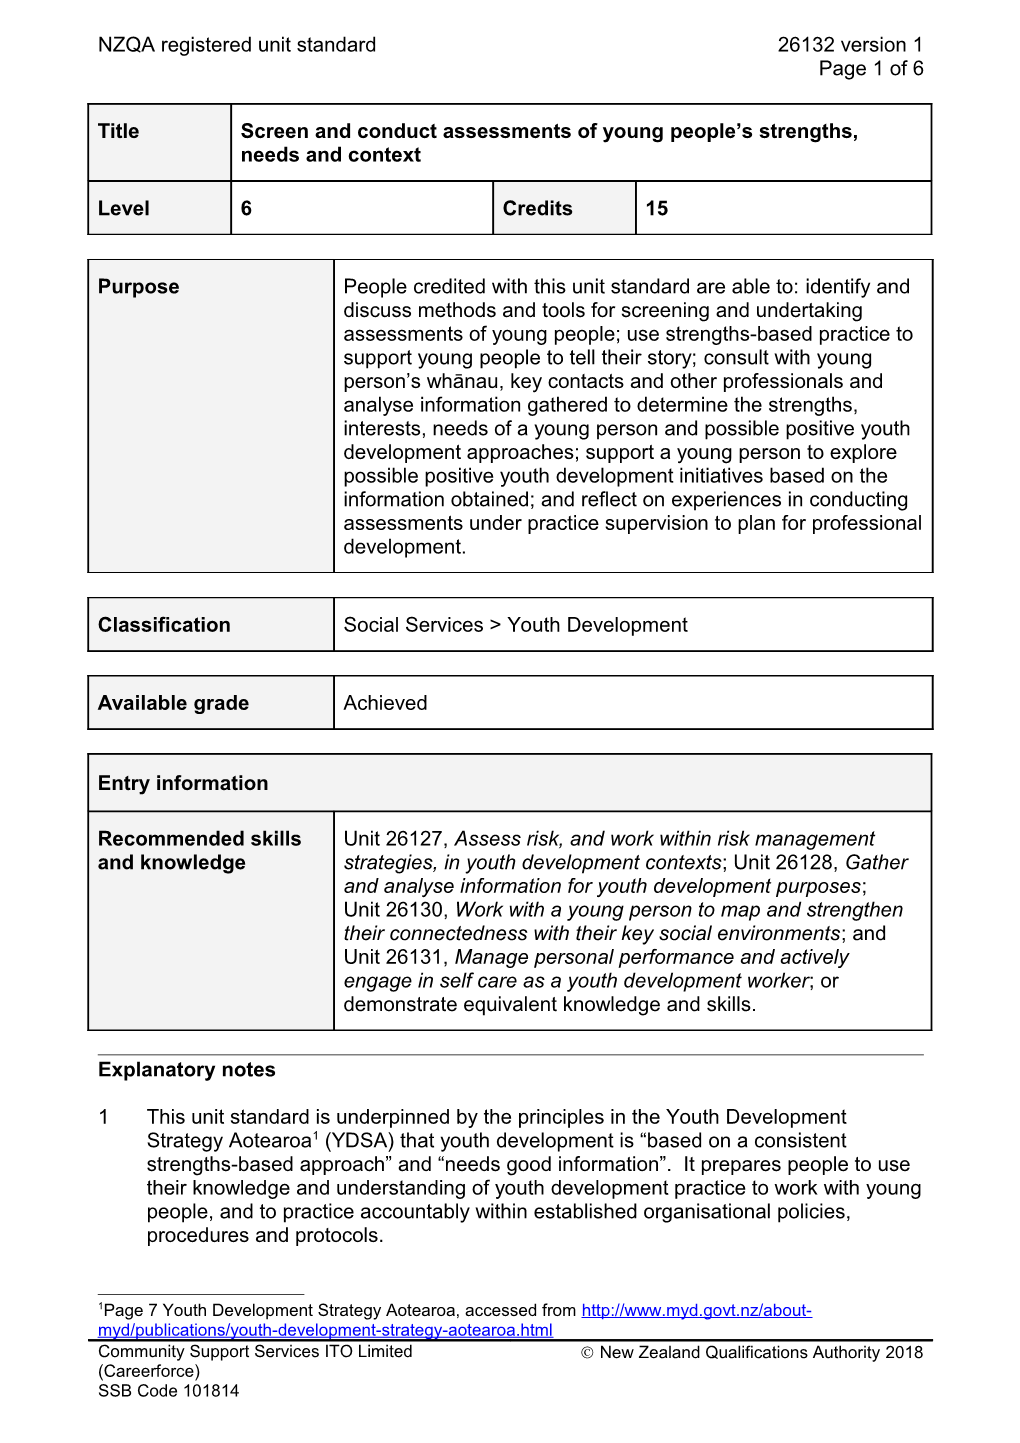 26132 Screen and Conduct Assessments of Young People S Strengths, Needs and Context